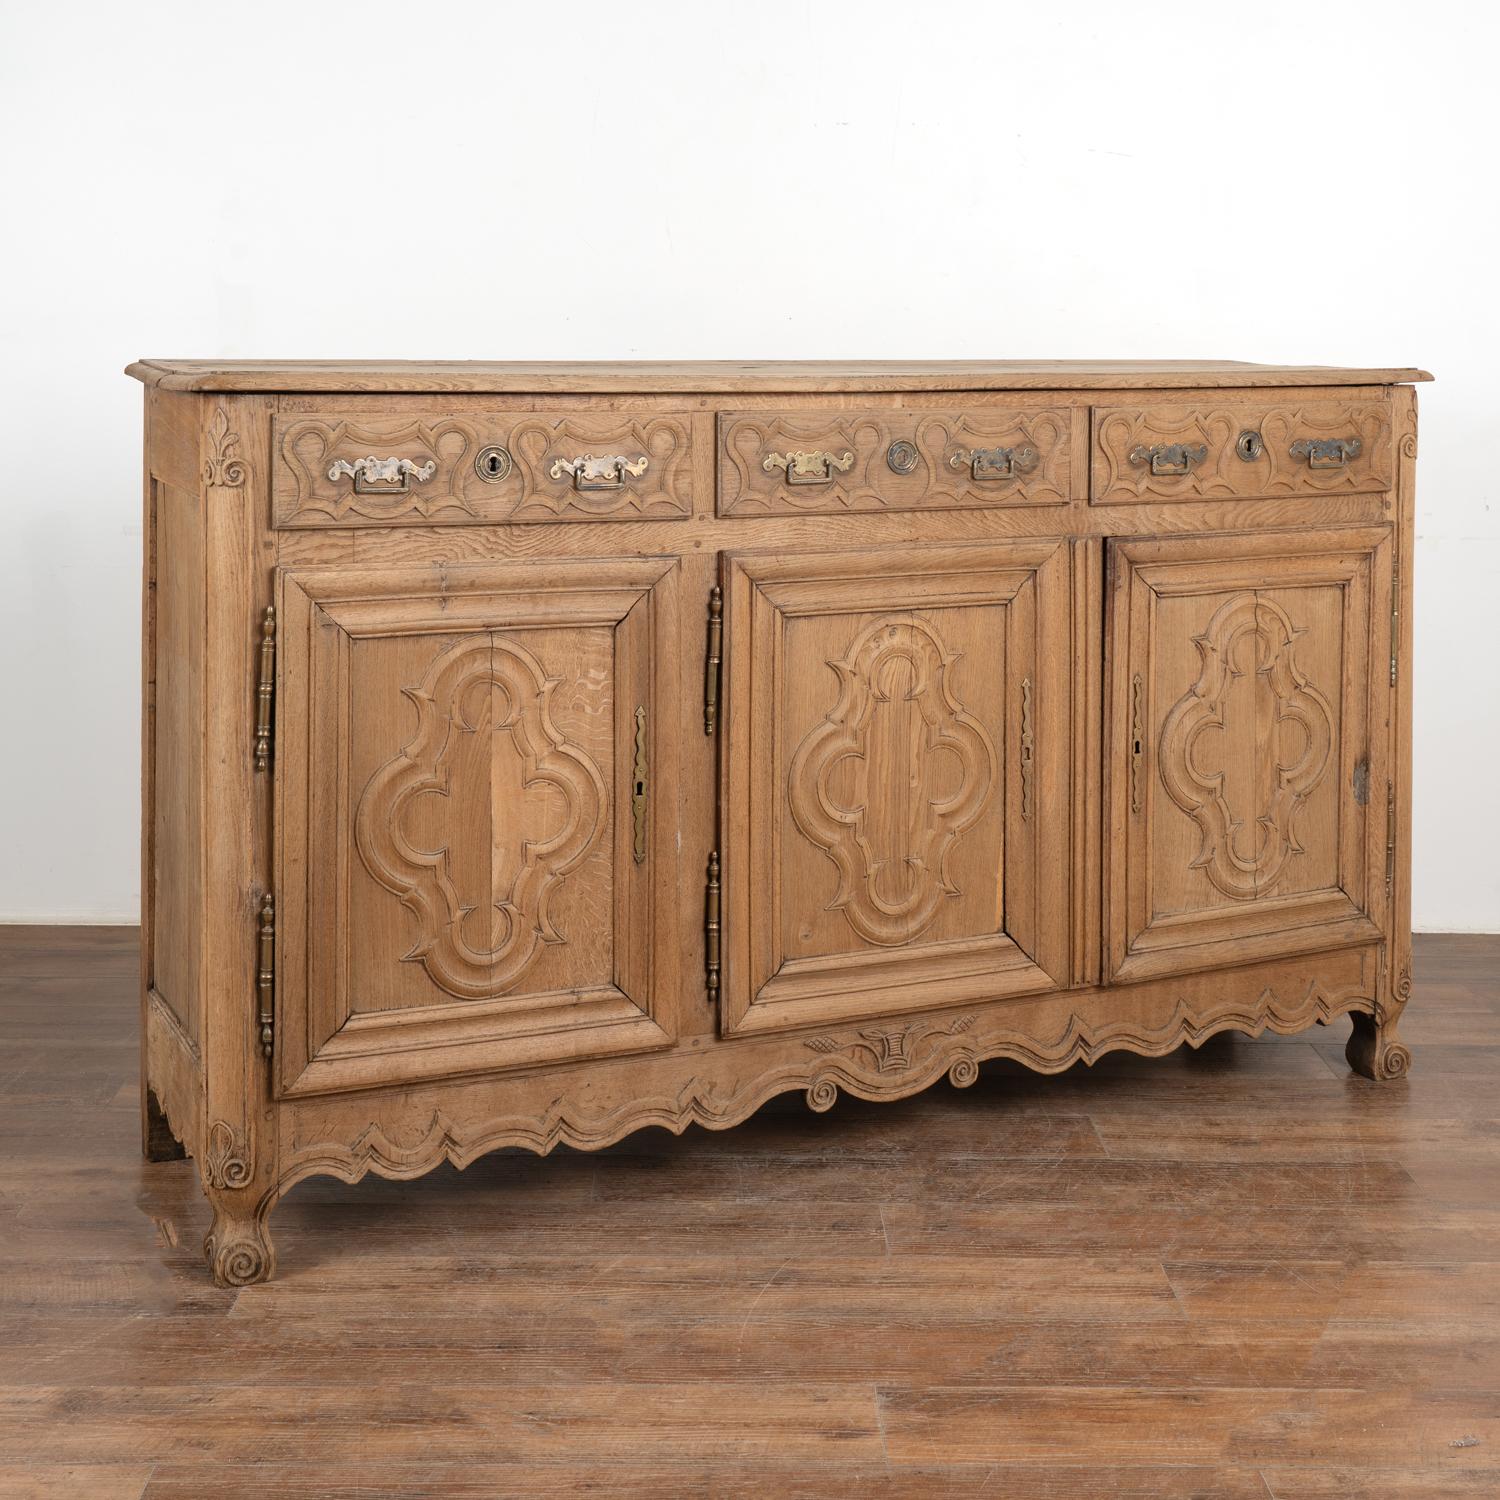 It is the lovely carved details and heavily paneled doors that draws one to this French oak sideboard while the bleached finish gives it a fresh and welcoming look for today's modern home and shows off the wonderful grain.
The attractive scalloped